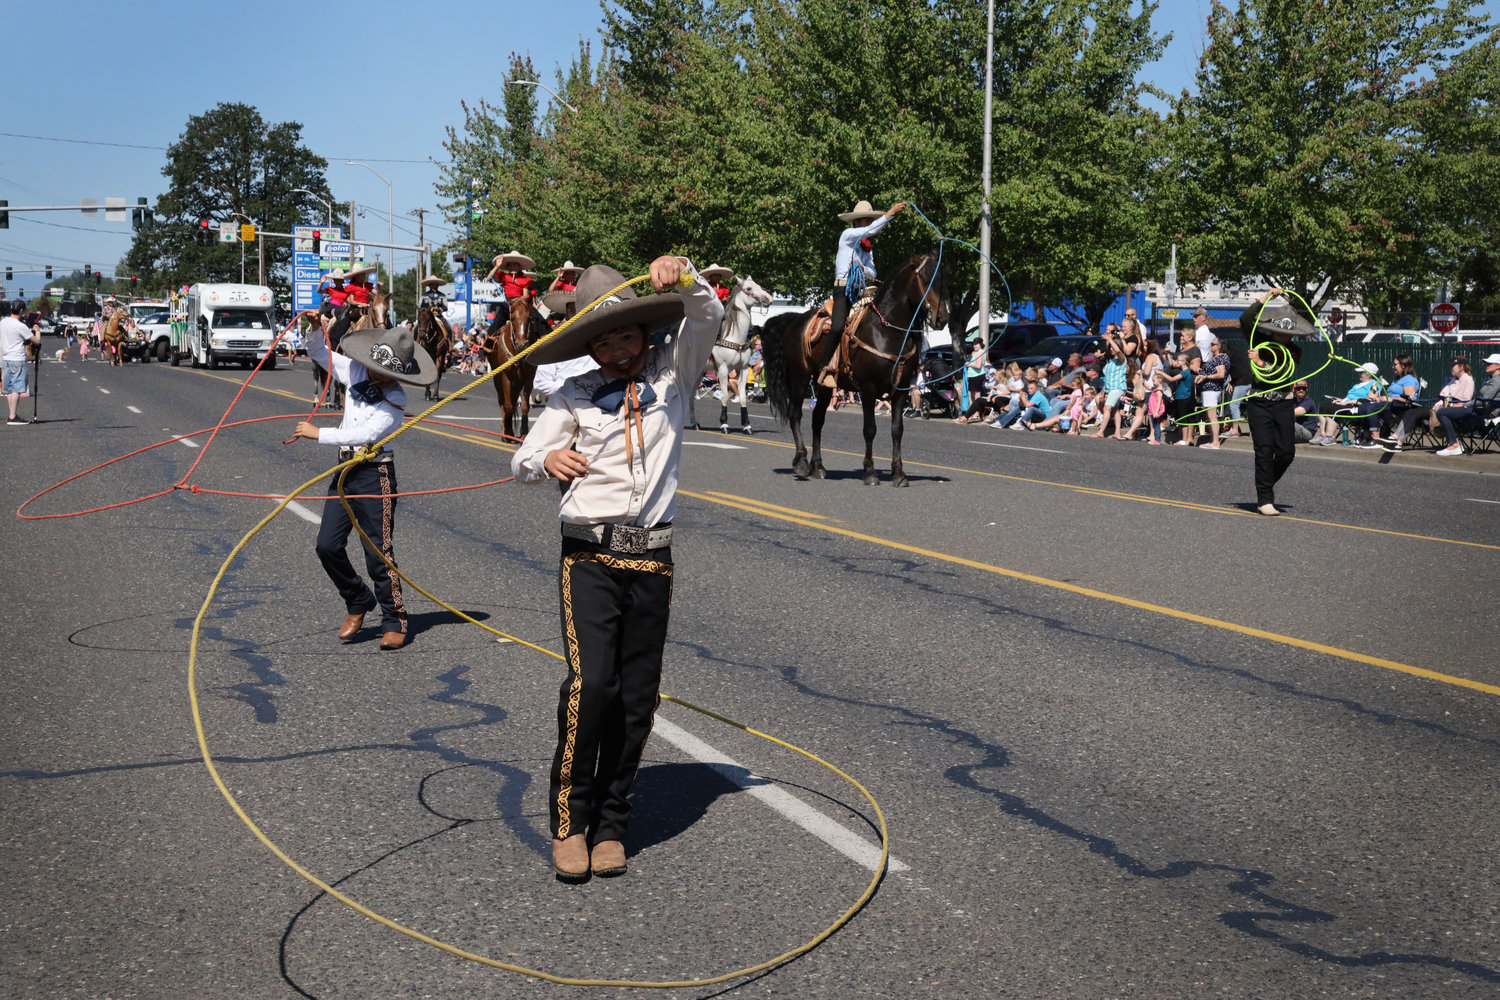 Performers spin lassos during the Battle Ground Harvest Days parade in 2019. The parade and a number of other events are making a return this year following a hiatus in 2020 due to the COVID-19 pandemic.